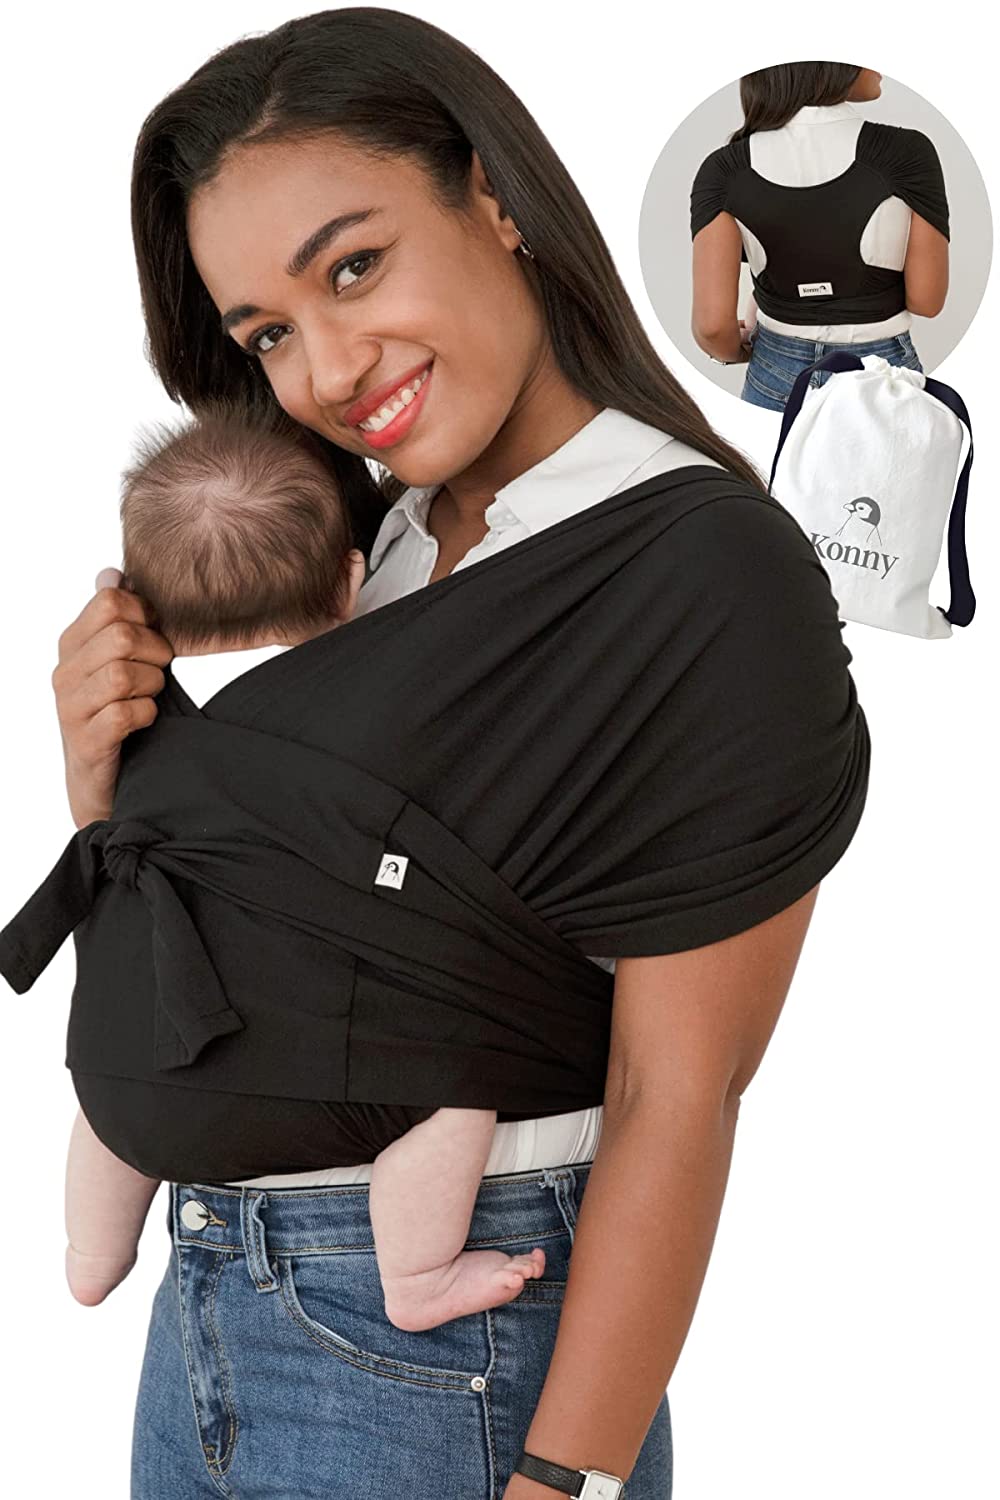 Konny Baby Carrier | Ultra-Light, Easy Baby Sling | Newborns, Infants up to 20 kg Toddlers | Soft and Breathable Fabric | Useful Sleep Solution (Black, XL)